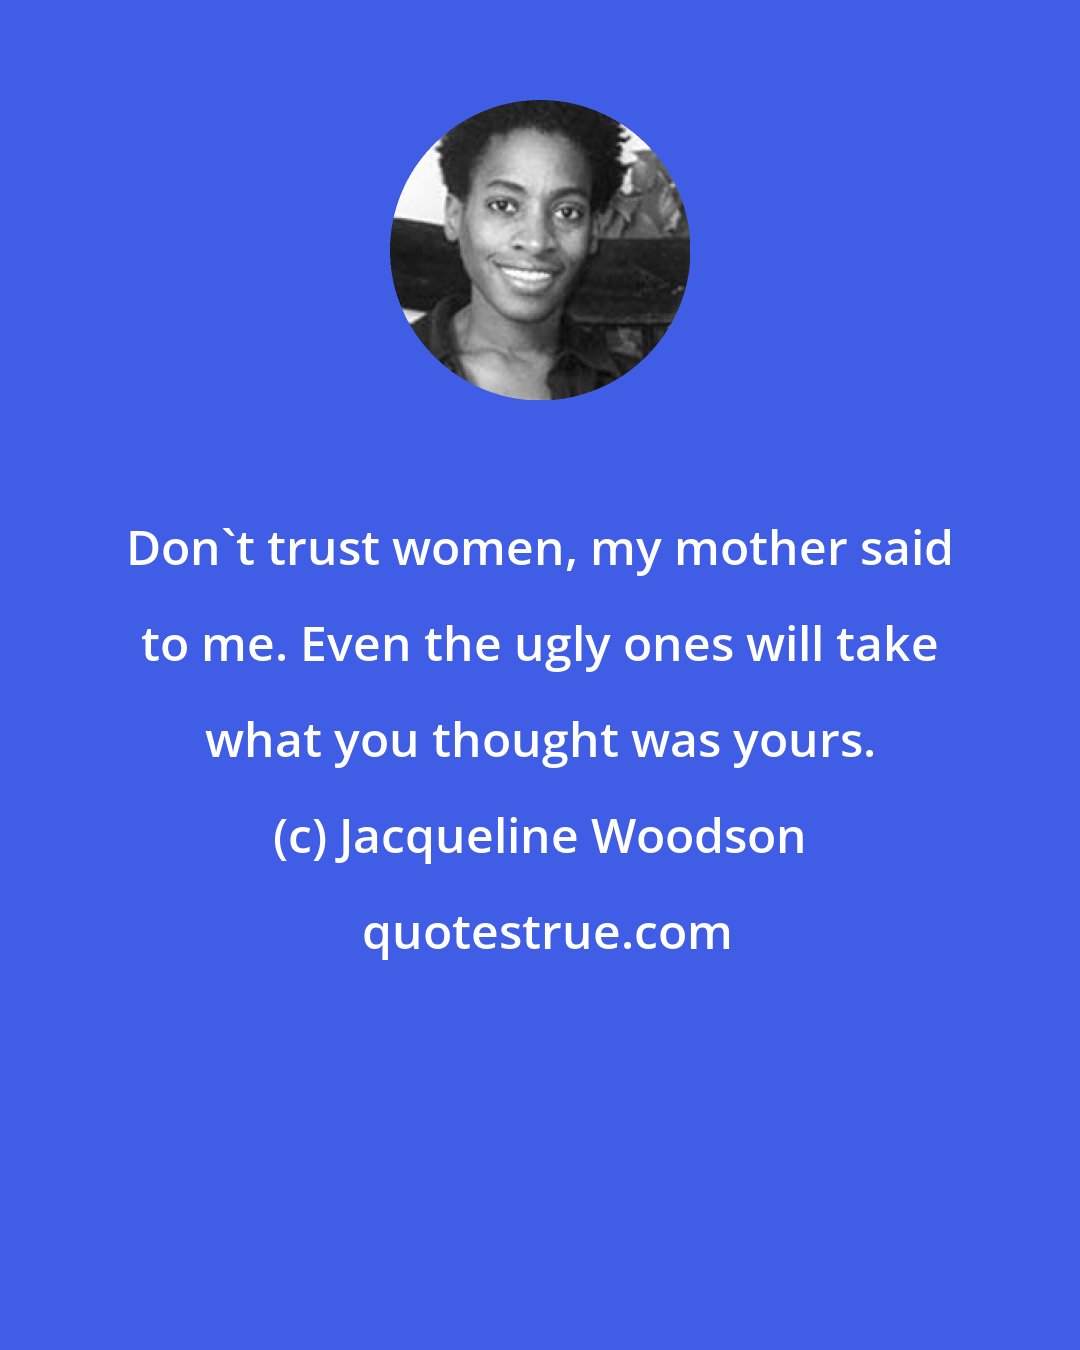 Jacqueline Woodson: Don't trust women, my mother said to me. Even the ugly ones will take what you thought was yours.